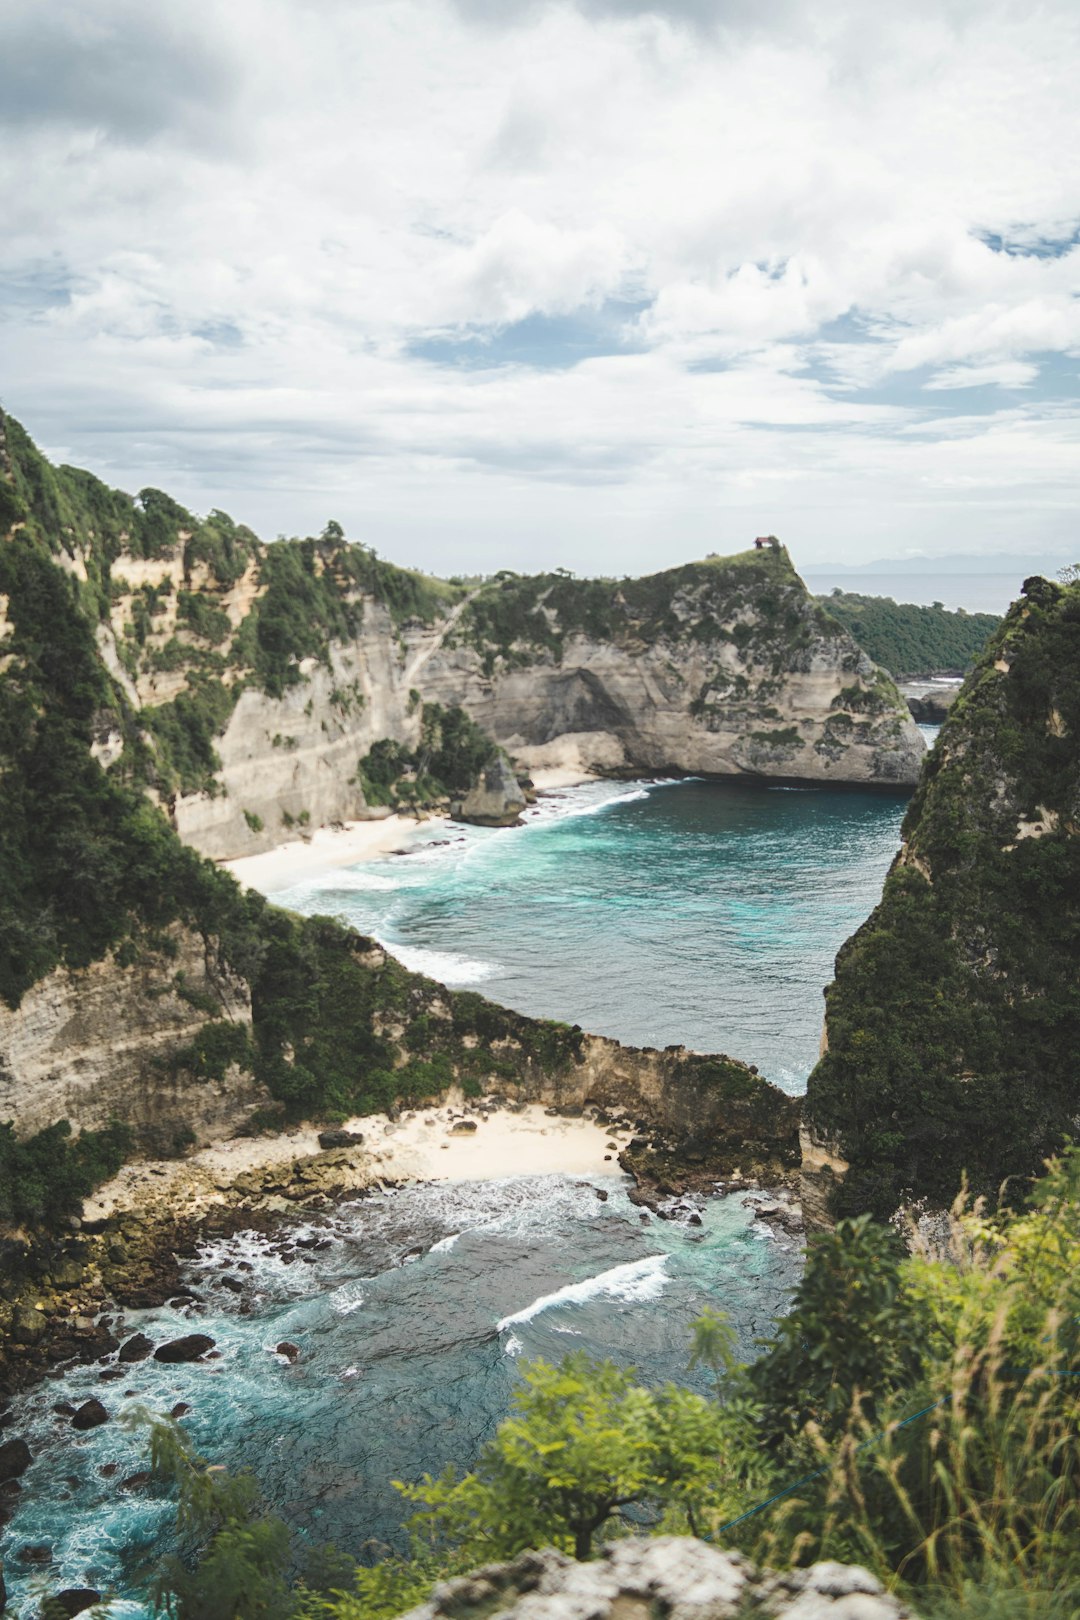 Travel Tips and Stories of Penida Island in Indonesia